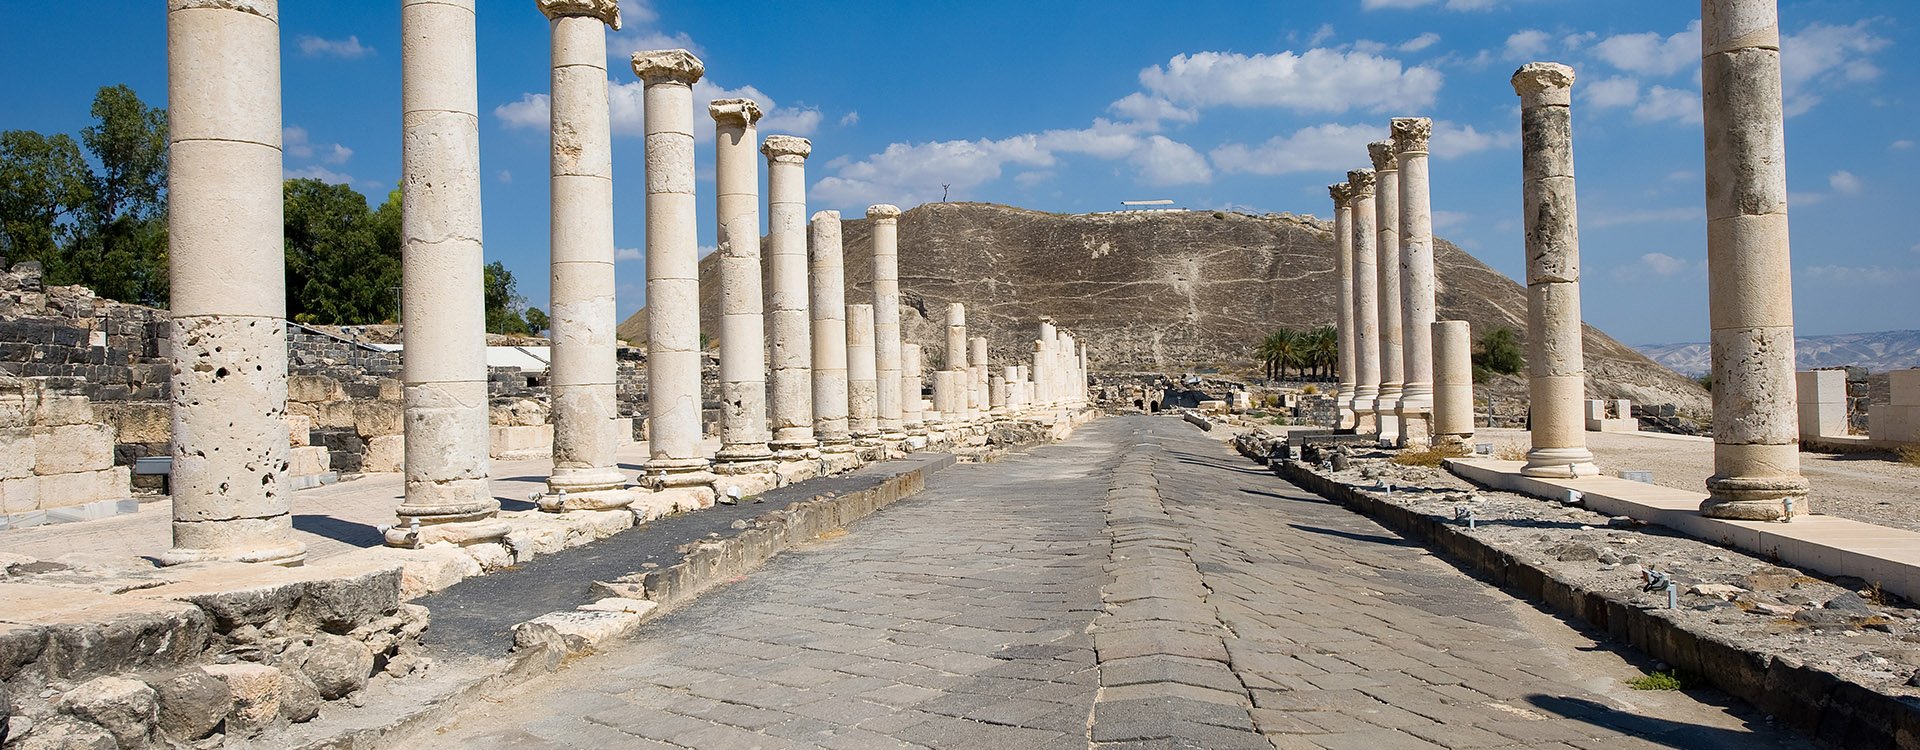 Ruins of the roman period in Beit She'An in Galilee in Israel